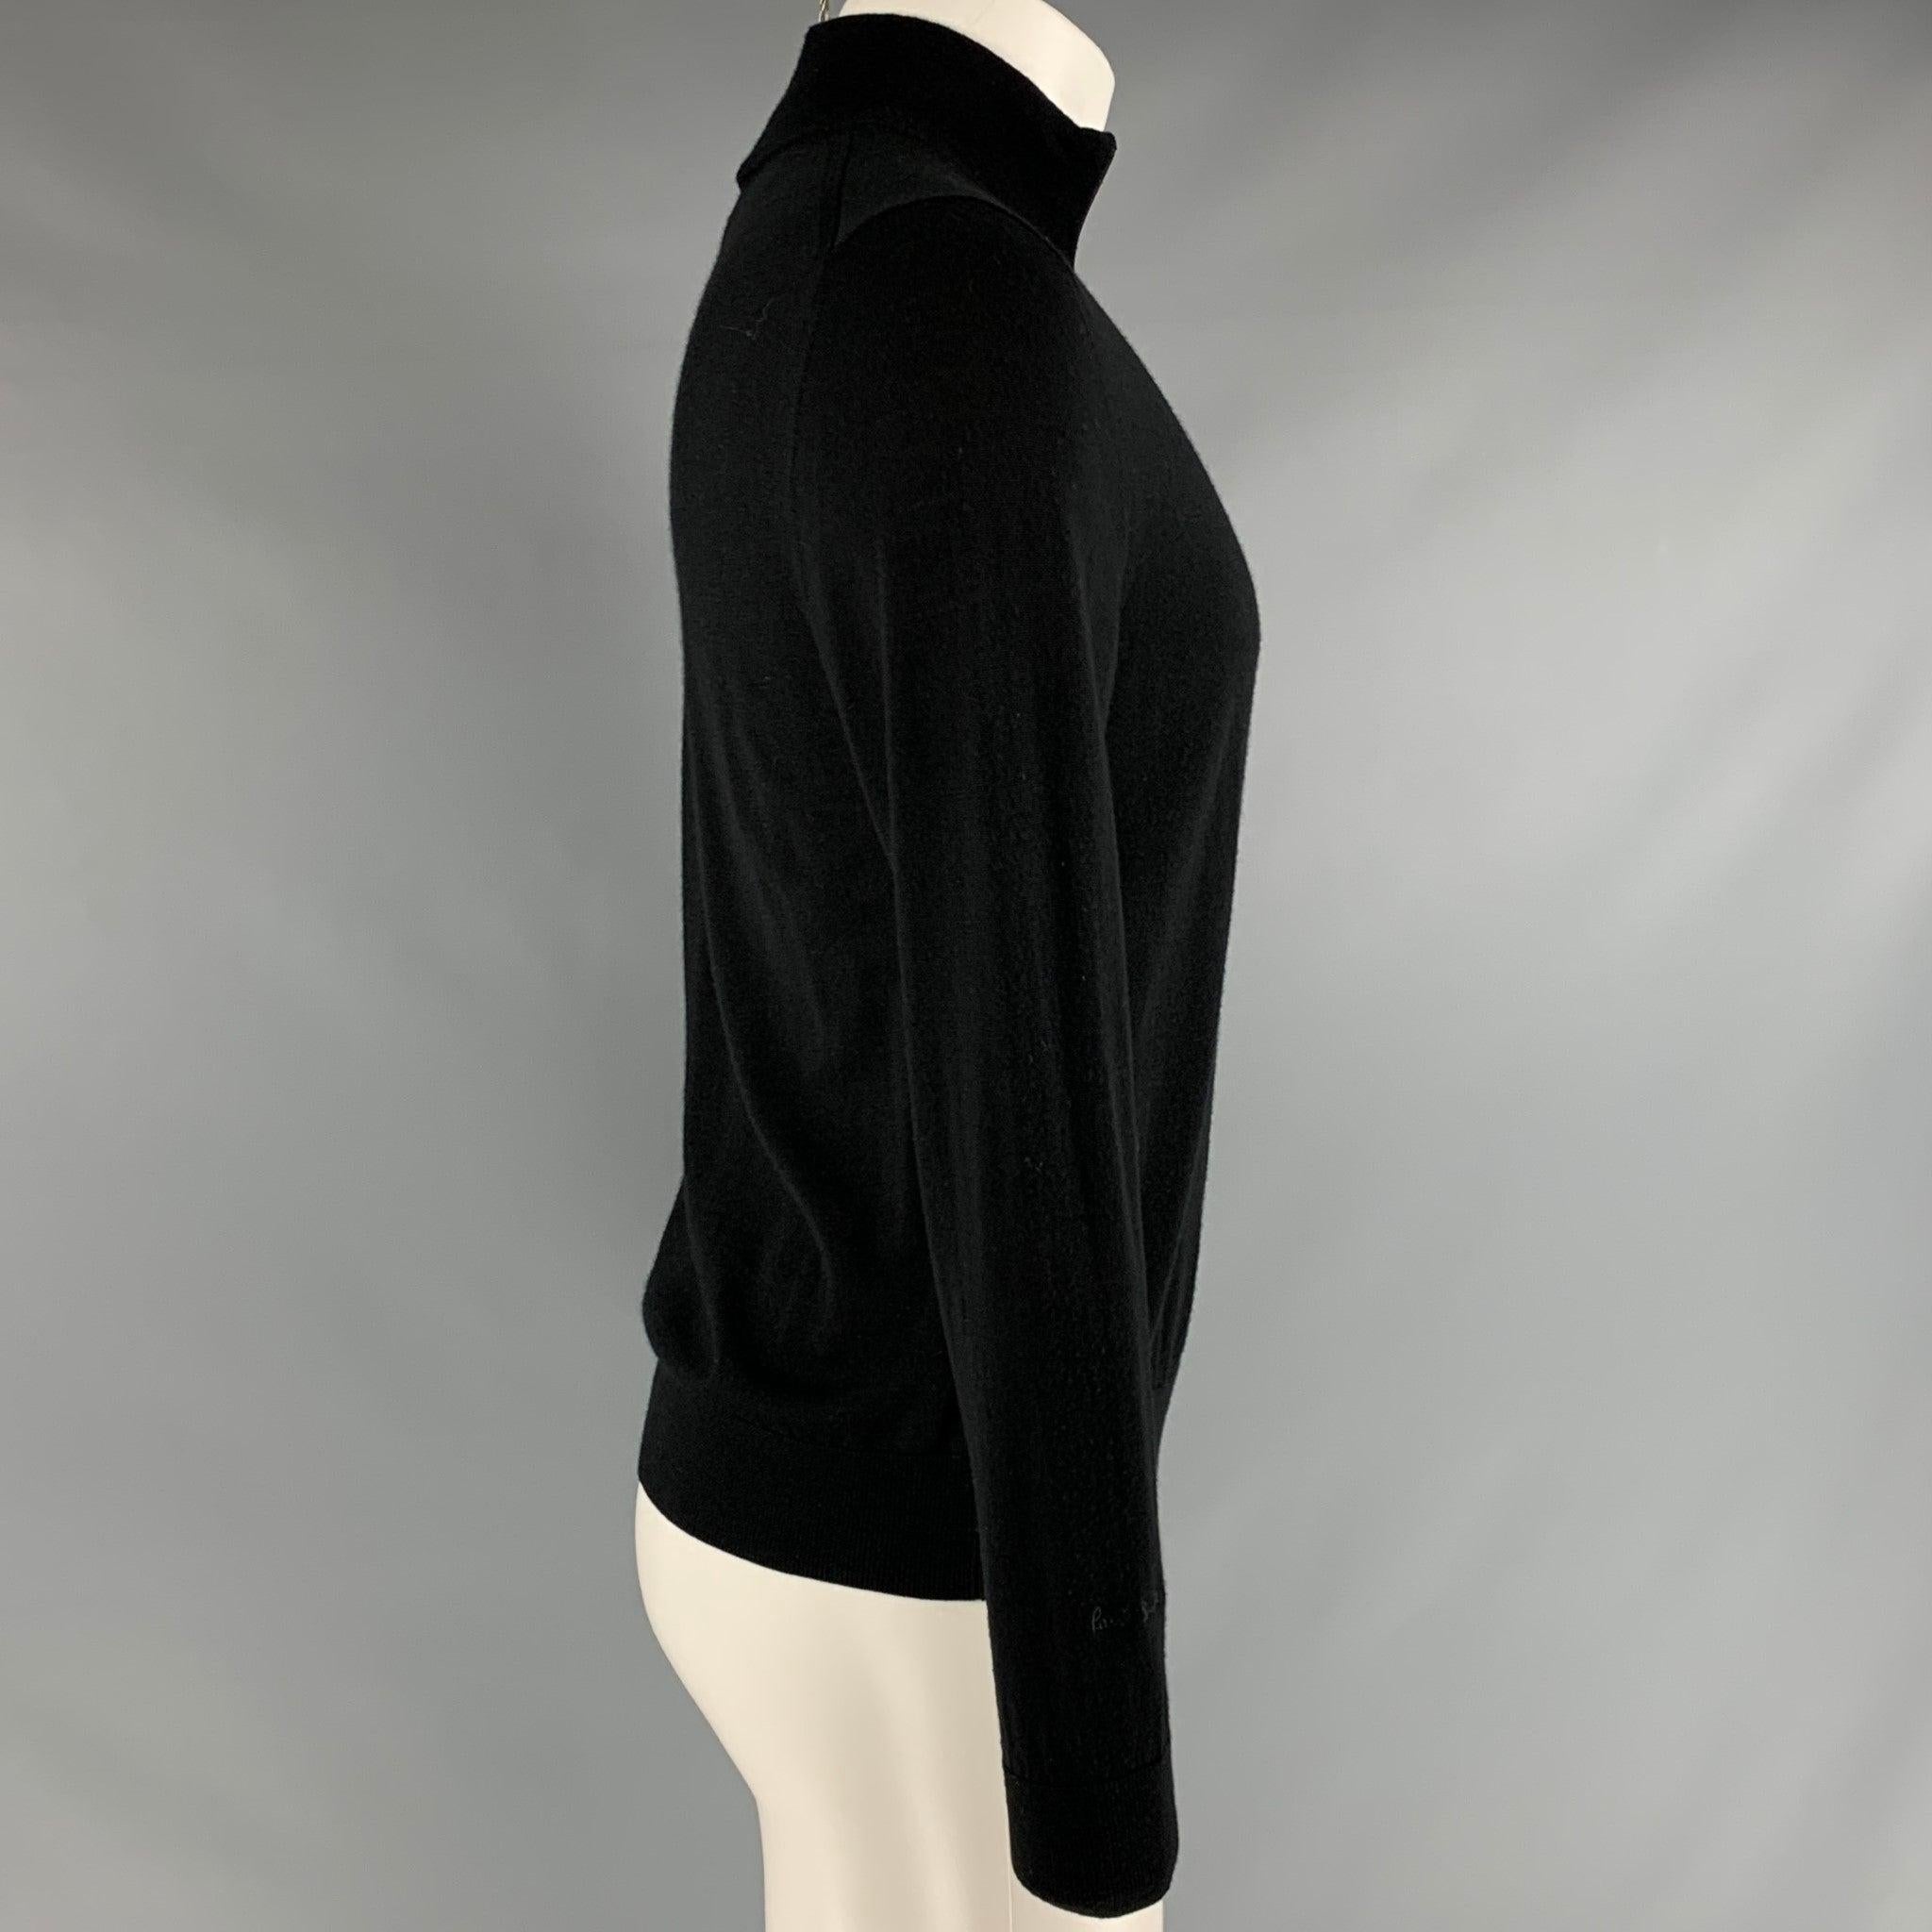 PAUL SMITH Size S Black Merino Wool Zip Up Pullover In Good Condition For Sale In San Francisco, CA